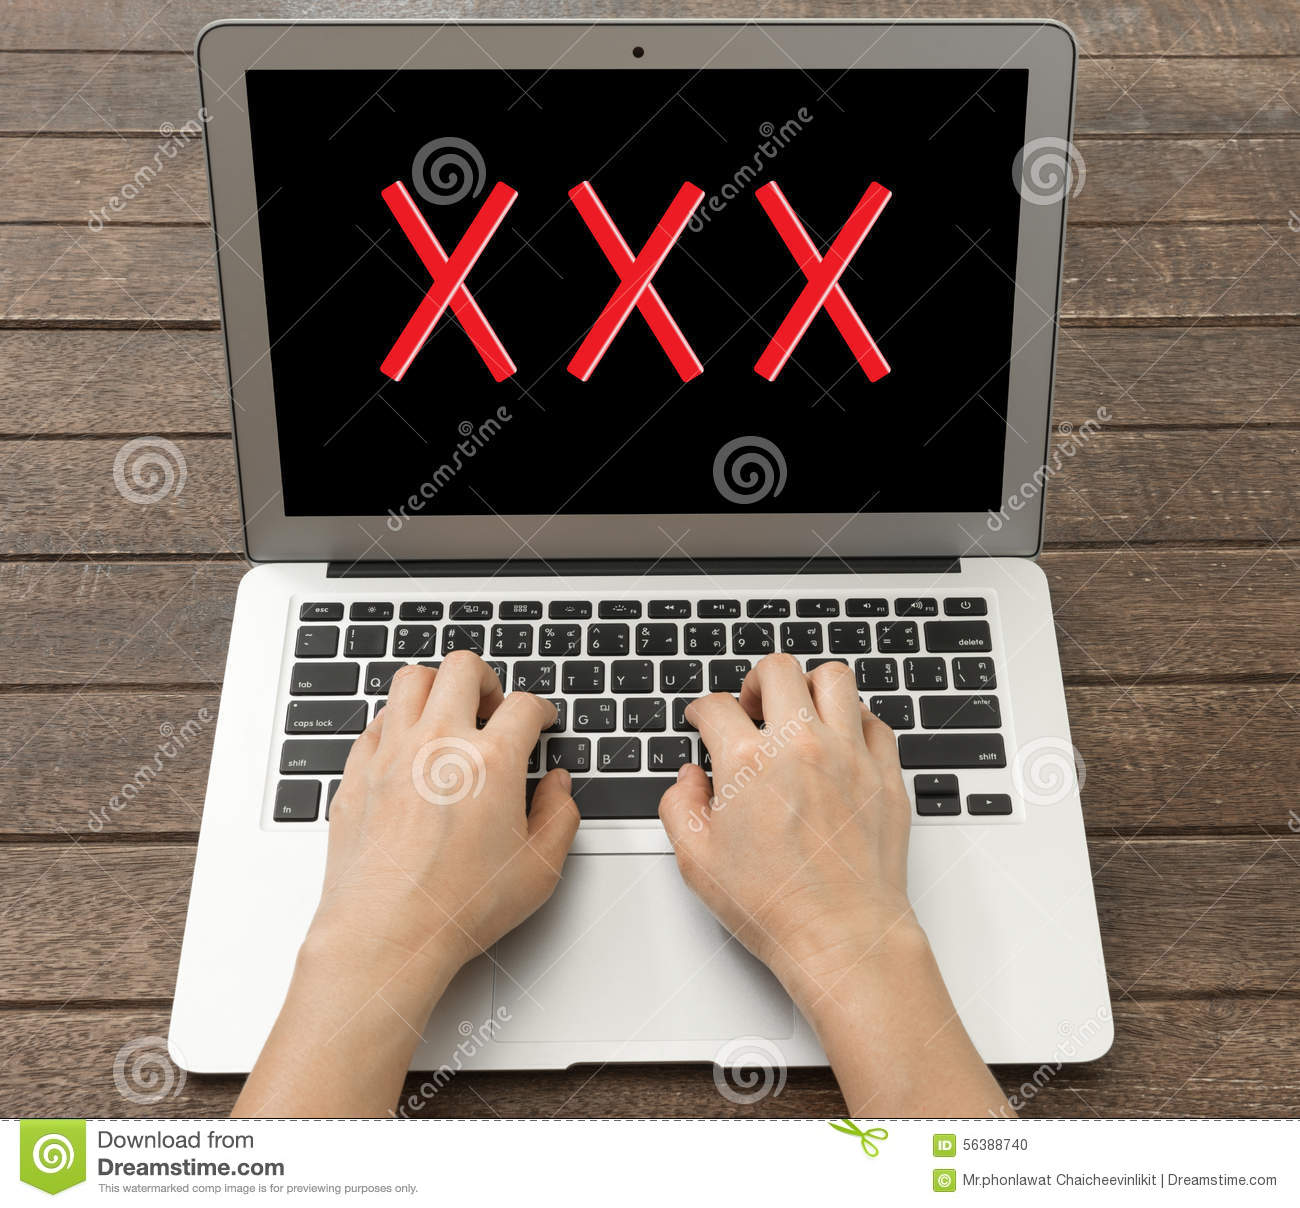 xxx sexual written on laptop monitor on wooden background porn concept stock photo